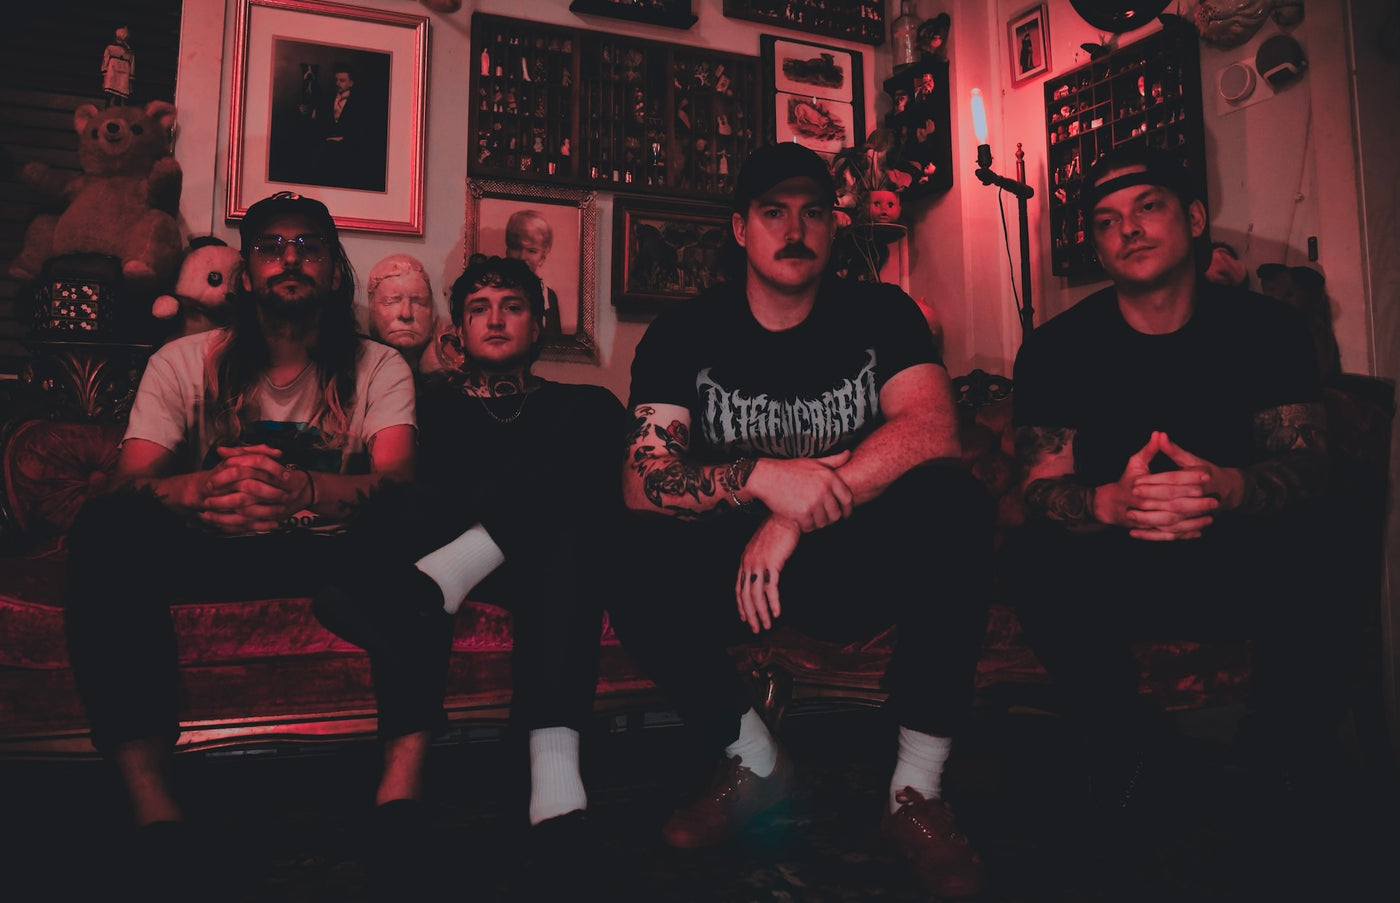 MouthBreather release new album Self-Tape on Good Fight Music